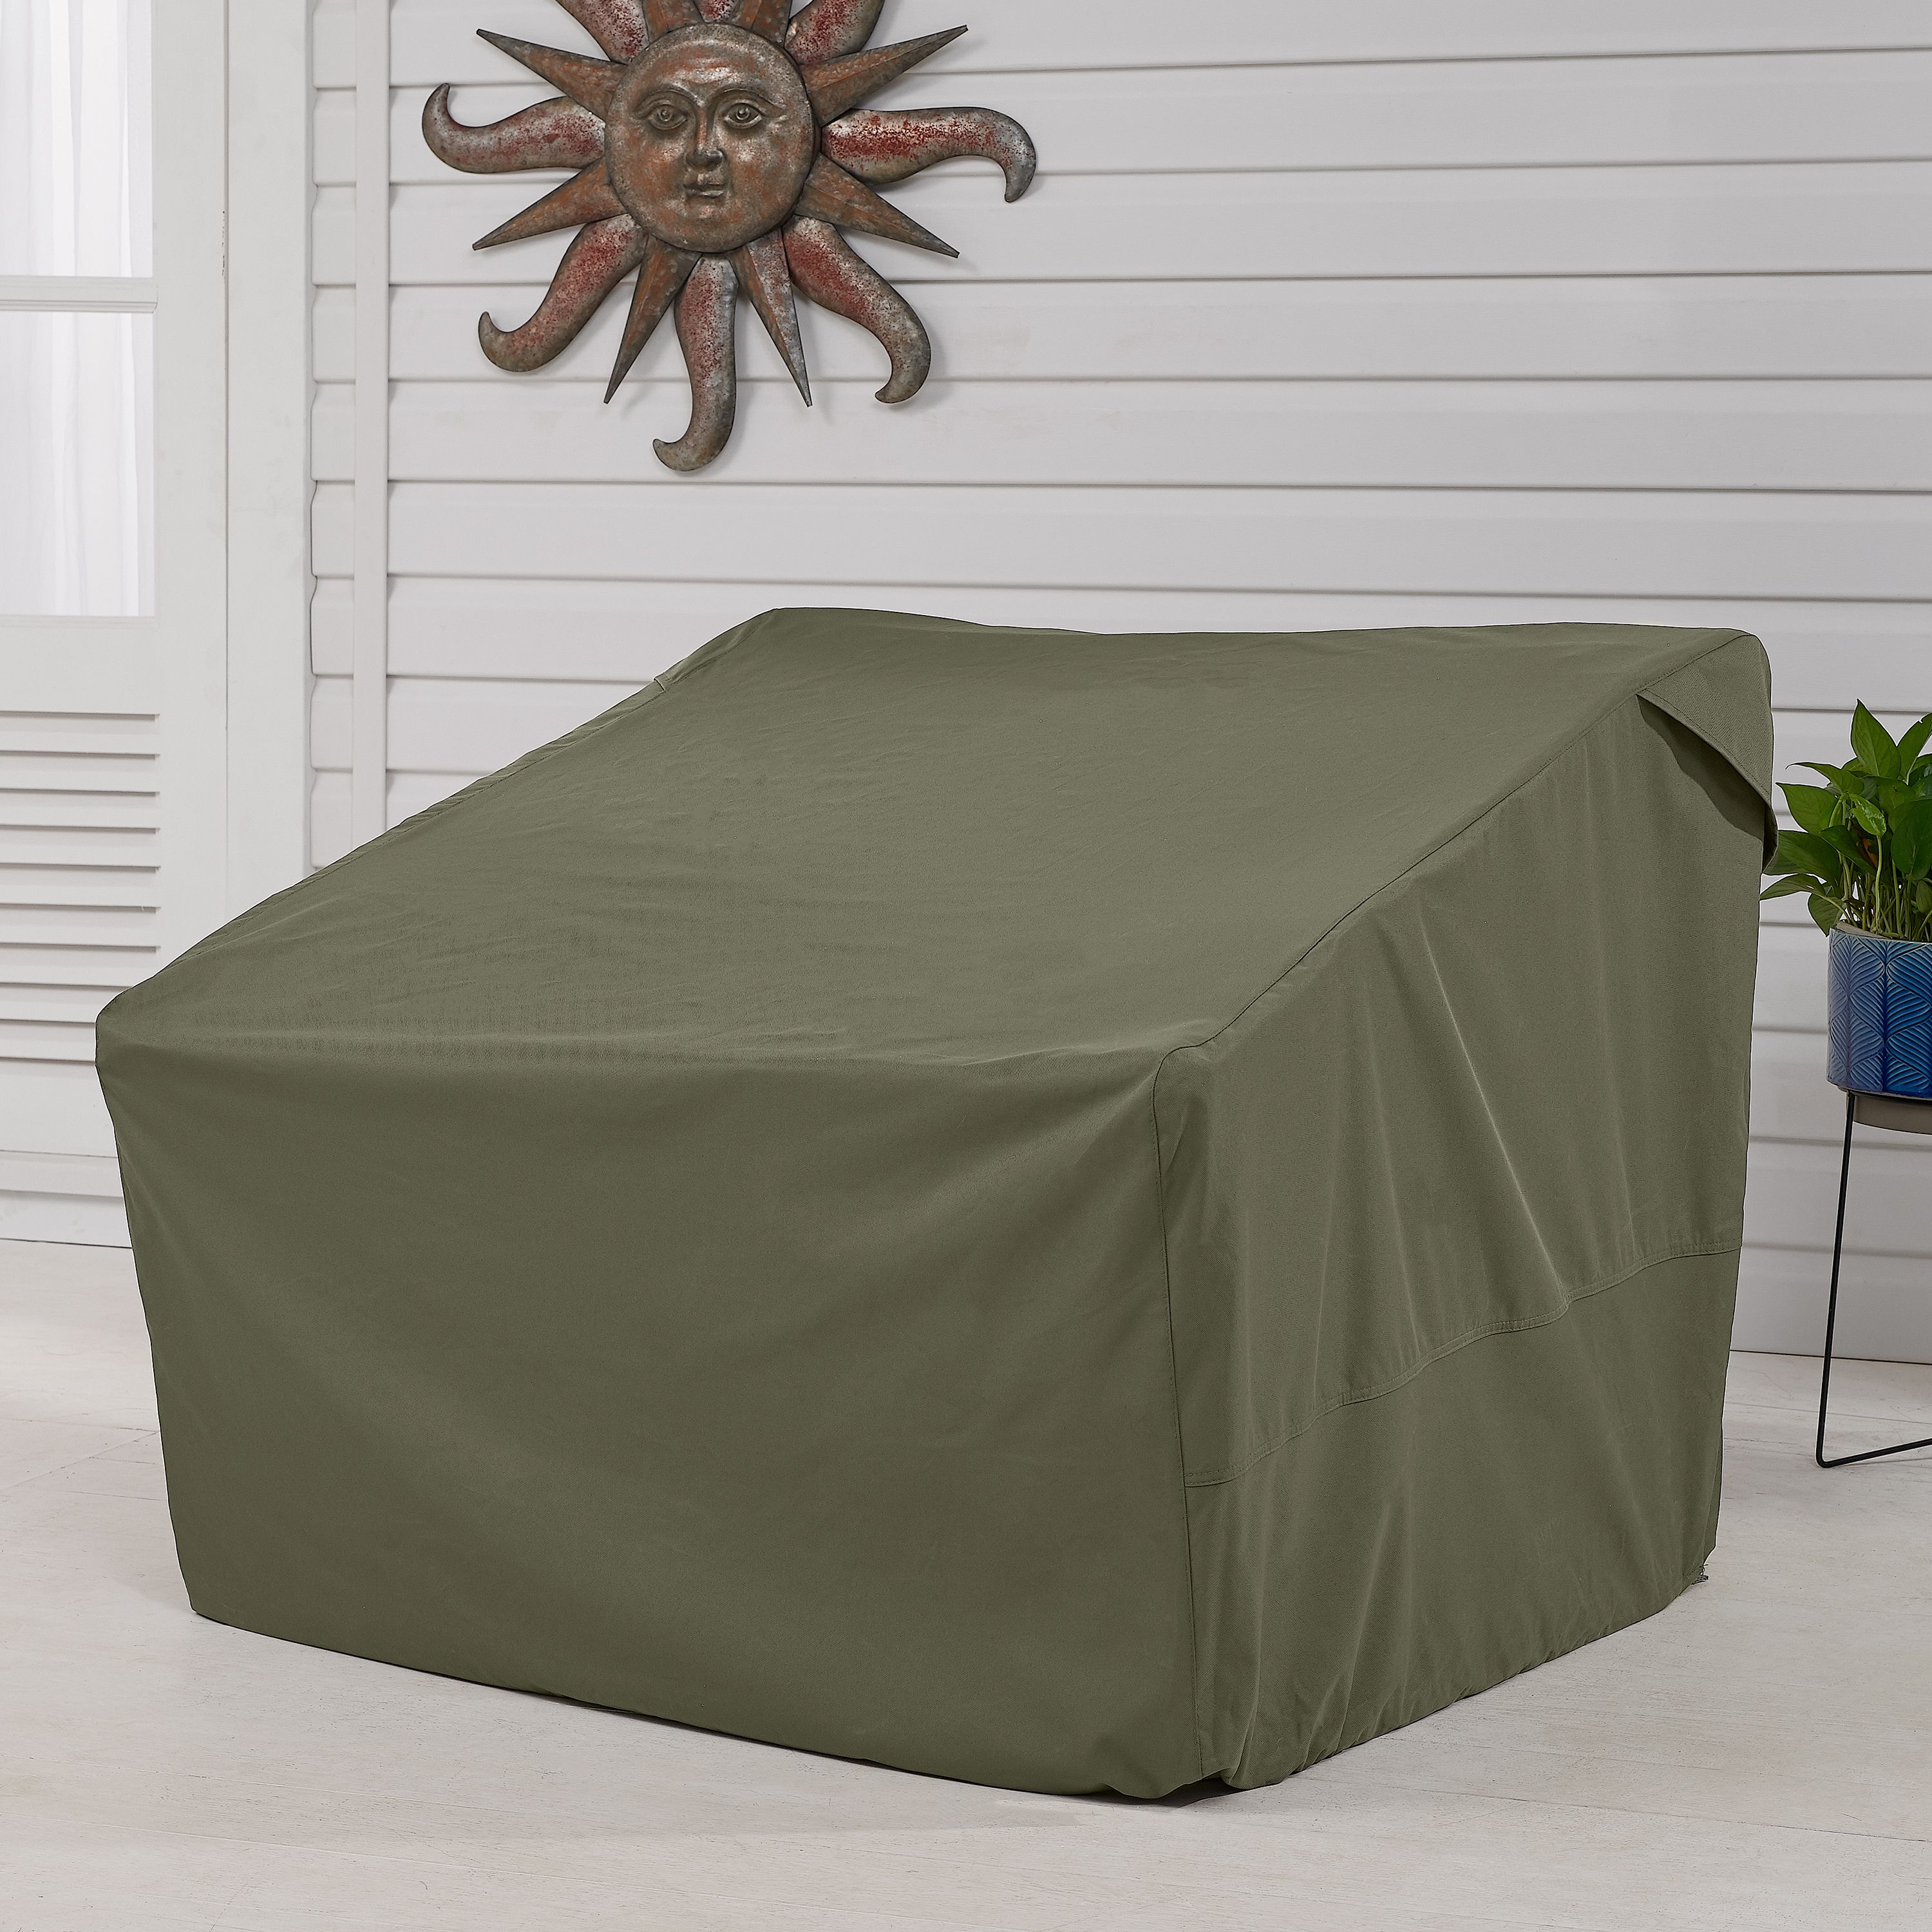 Better Homes & Gardens Hillberge Patio Lounge Chair Cover, 40 x 40 x 36 inch, Olive Gray - image 2 of 2